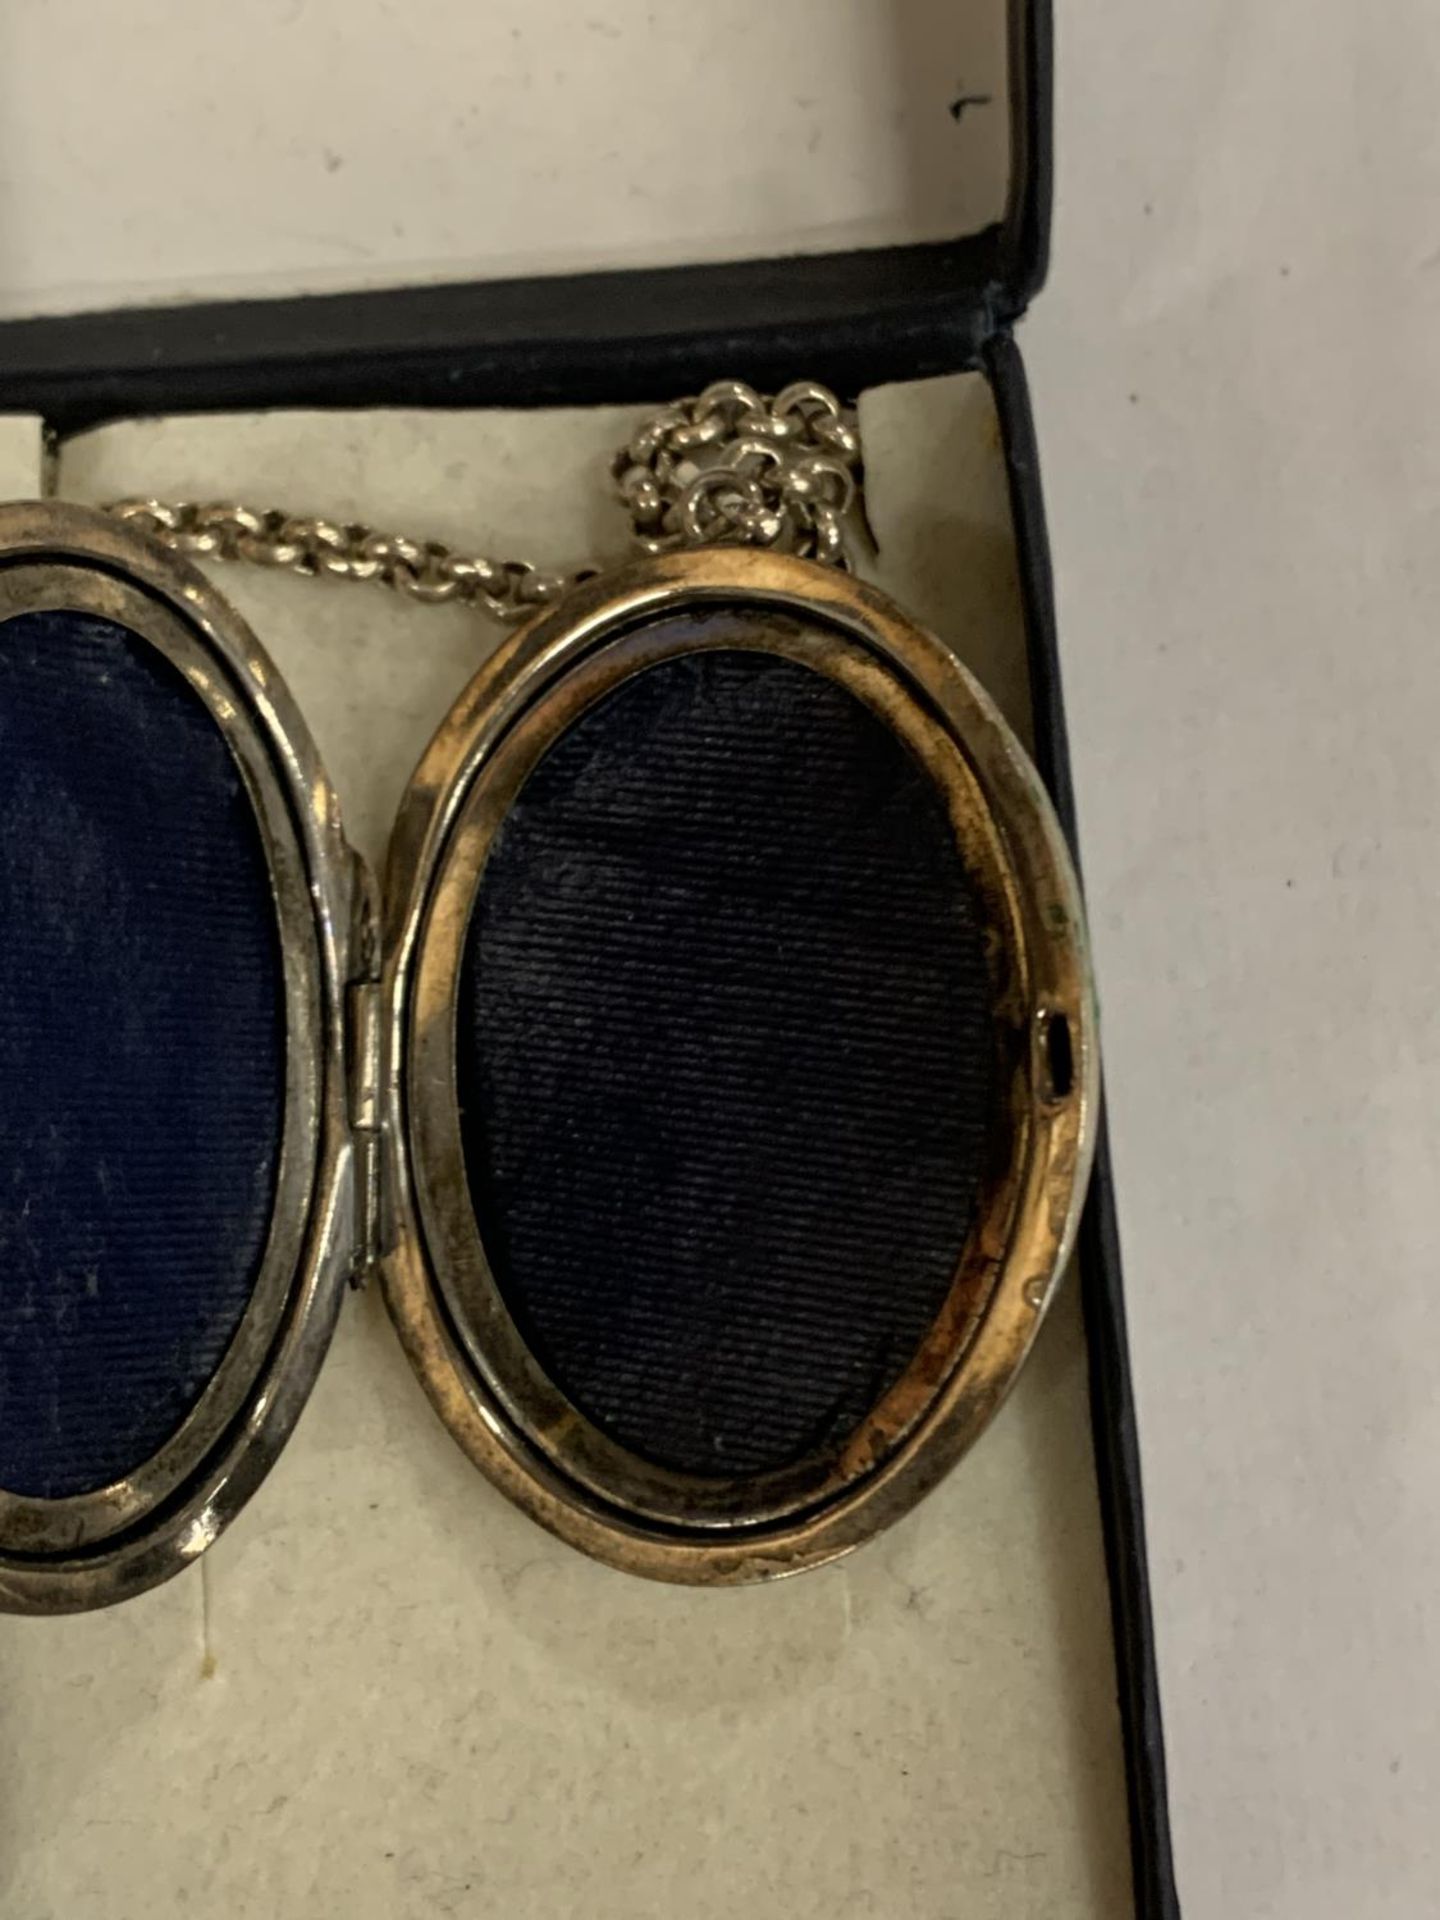 A SILVER OVAL LOCKET IN A PRESENTATION BOX - Image 4 of 4